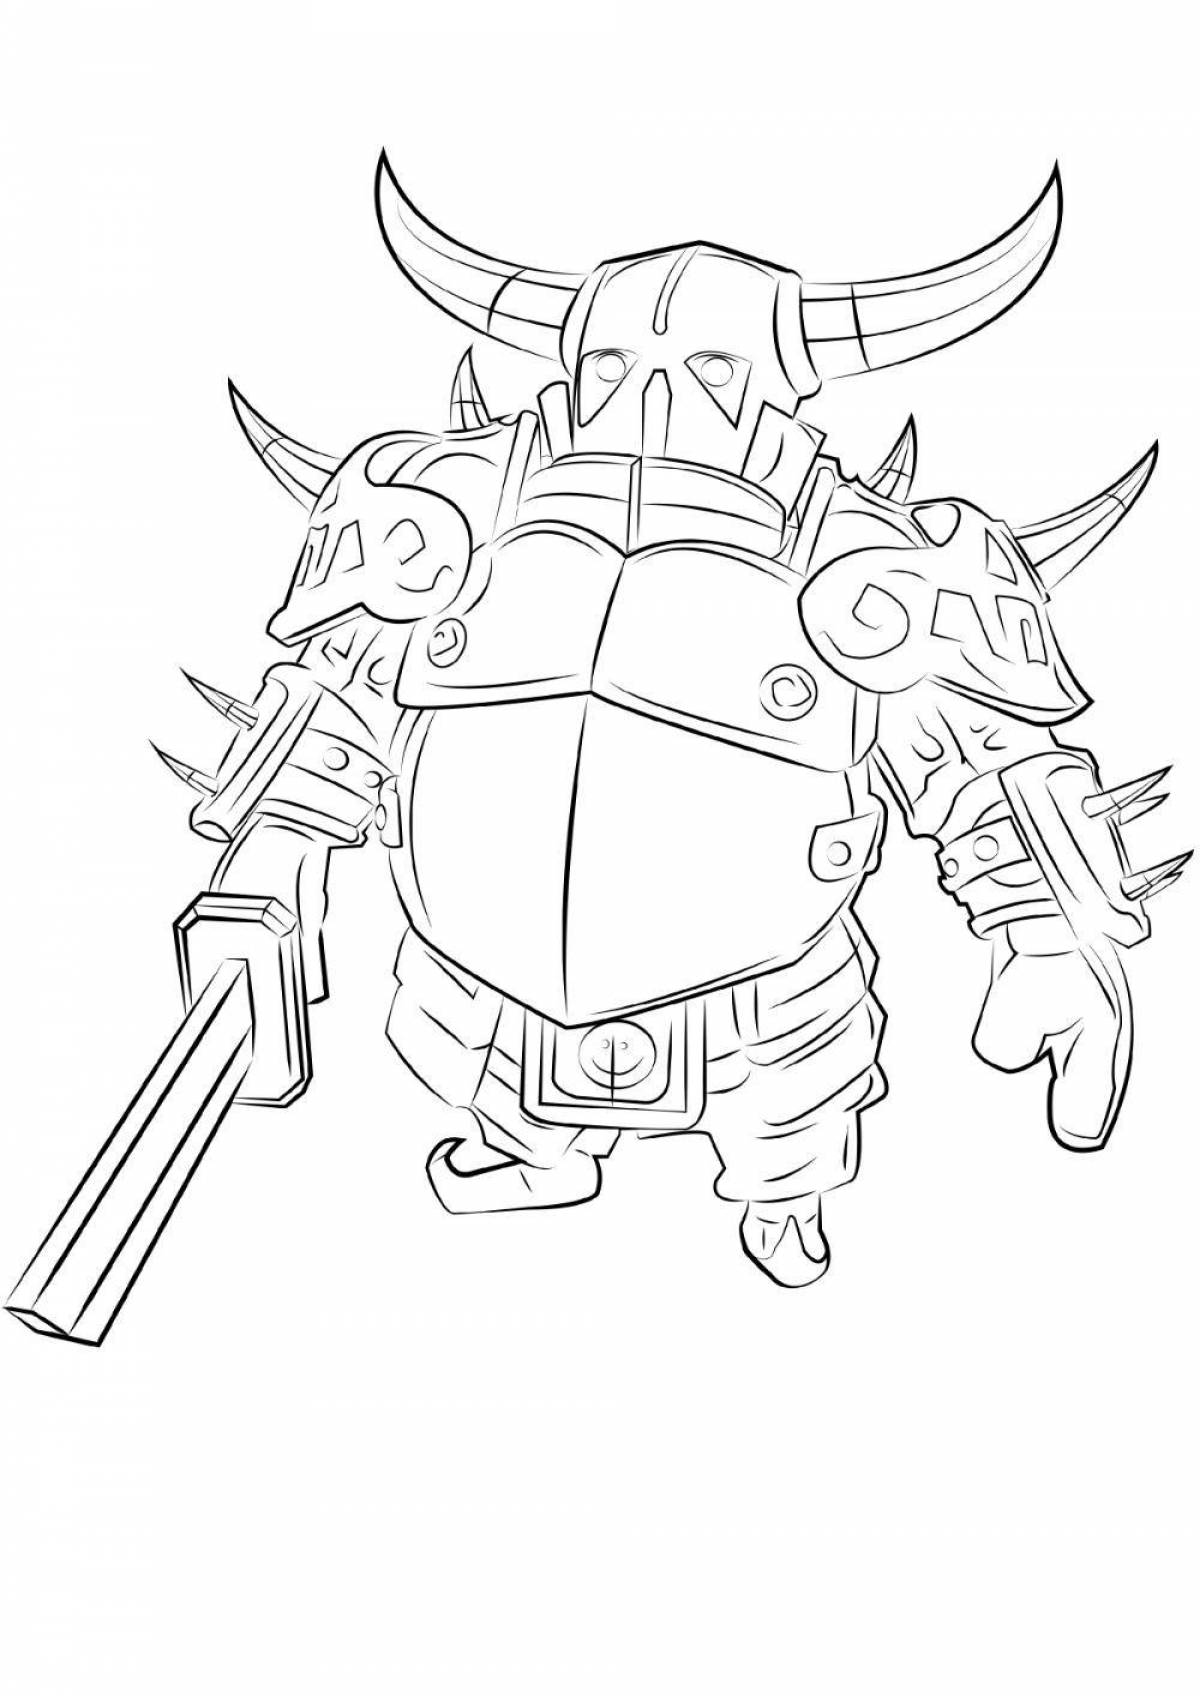 Animated clash royale coloring page